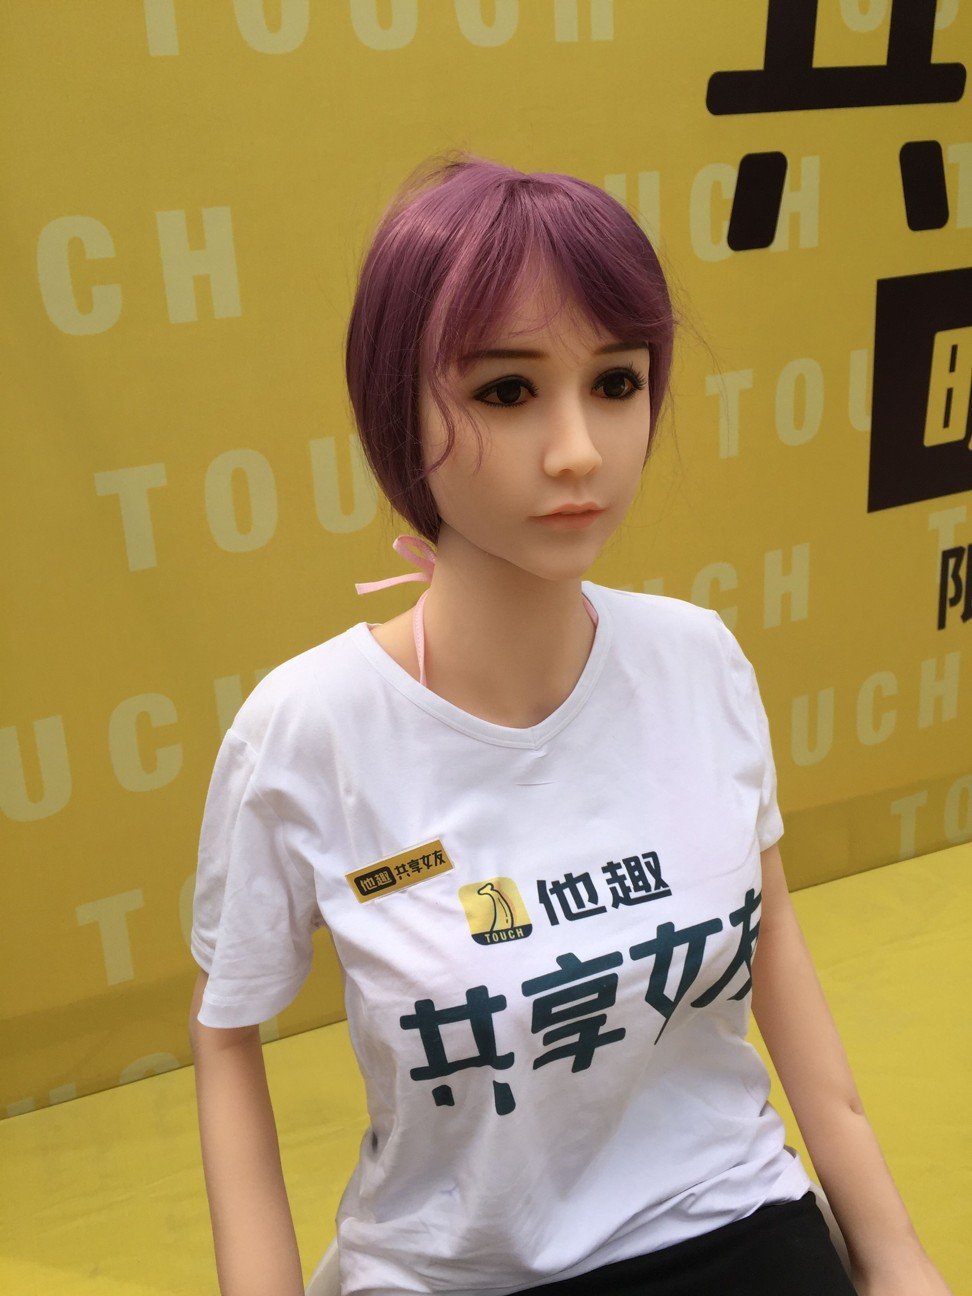 A Touch sex doll. The company says its Share Girlfriends service can help address the needs of Chinese men who can’t find a spouse. Photo: AFP/Touch